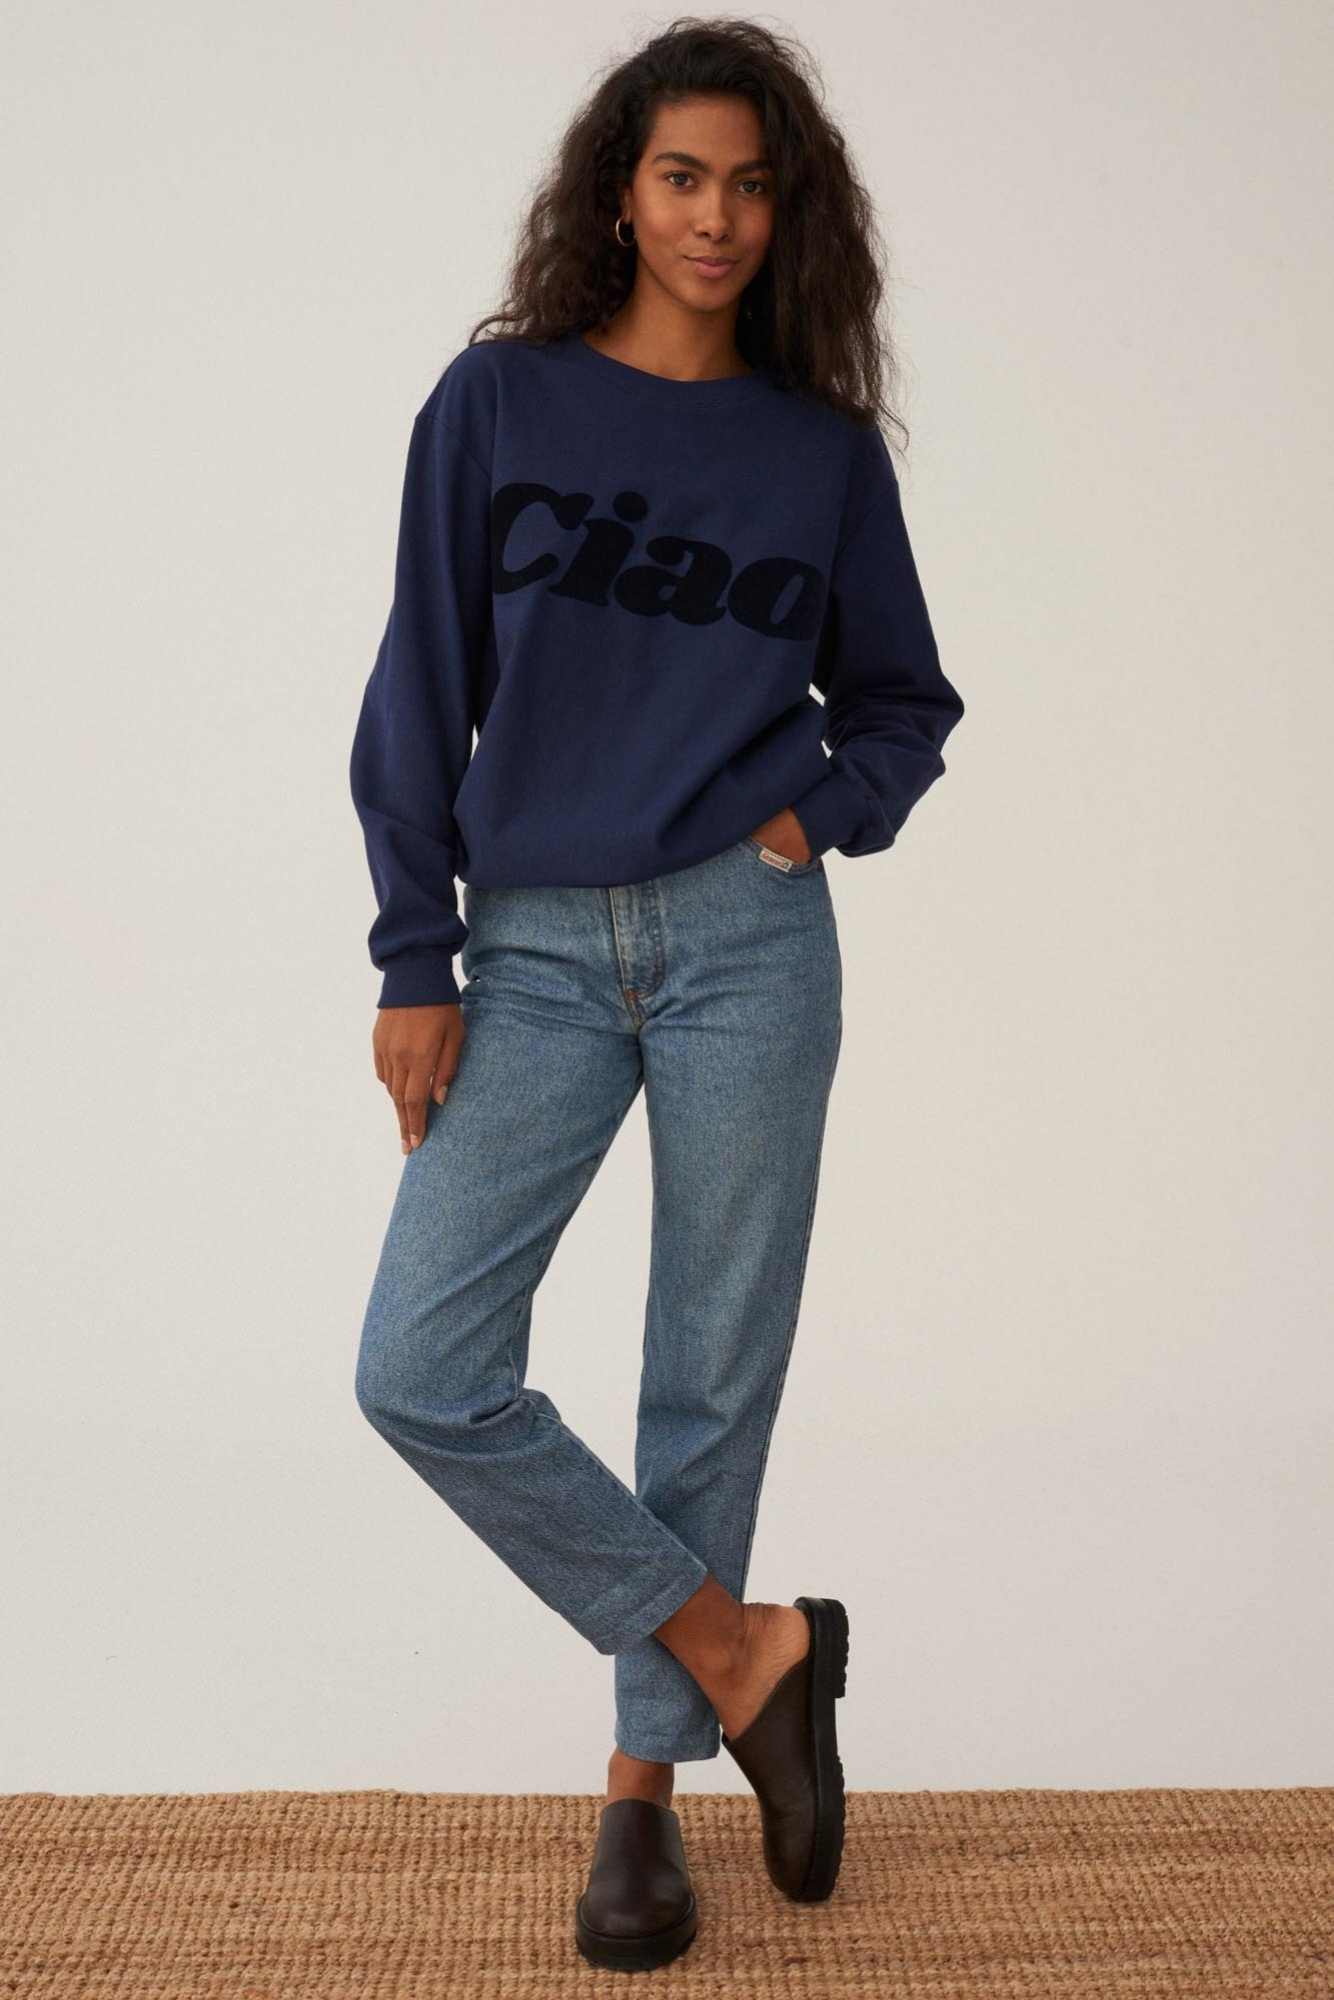 Les Goodies - She Is Sunday Ciao Sweatshirt Navy Blue